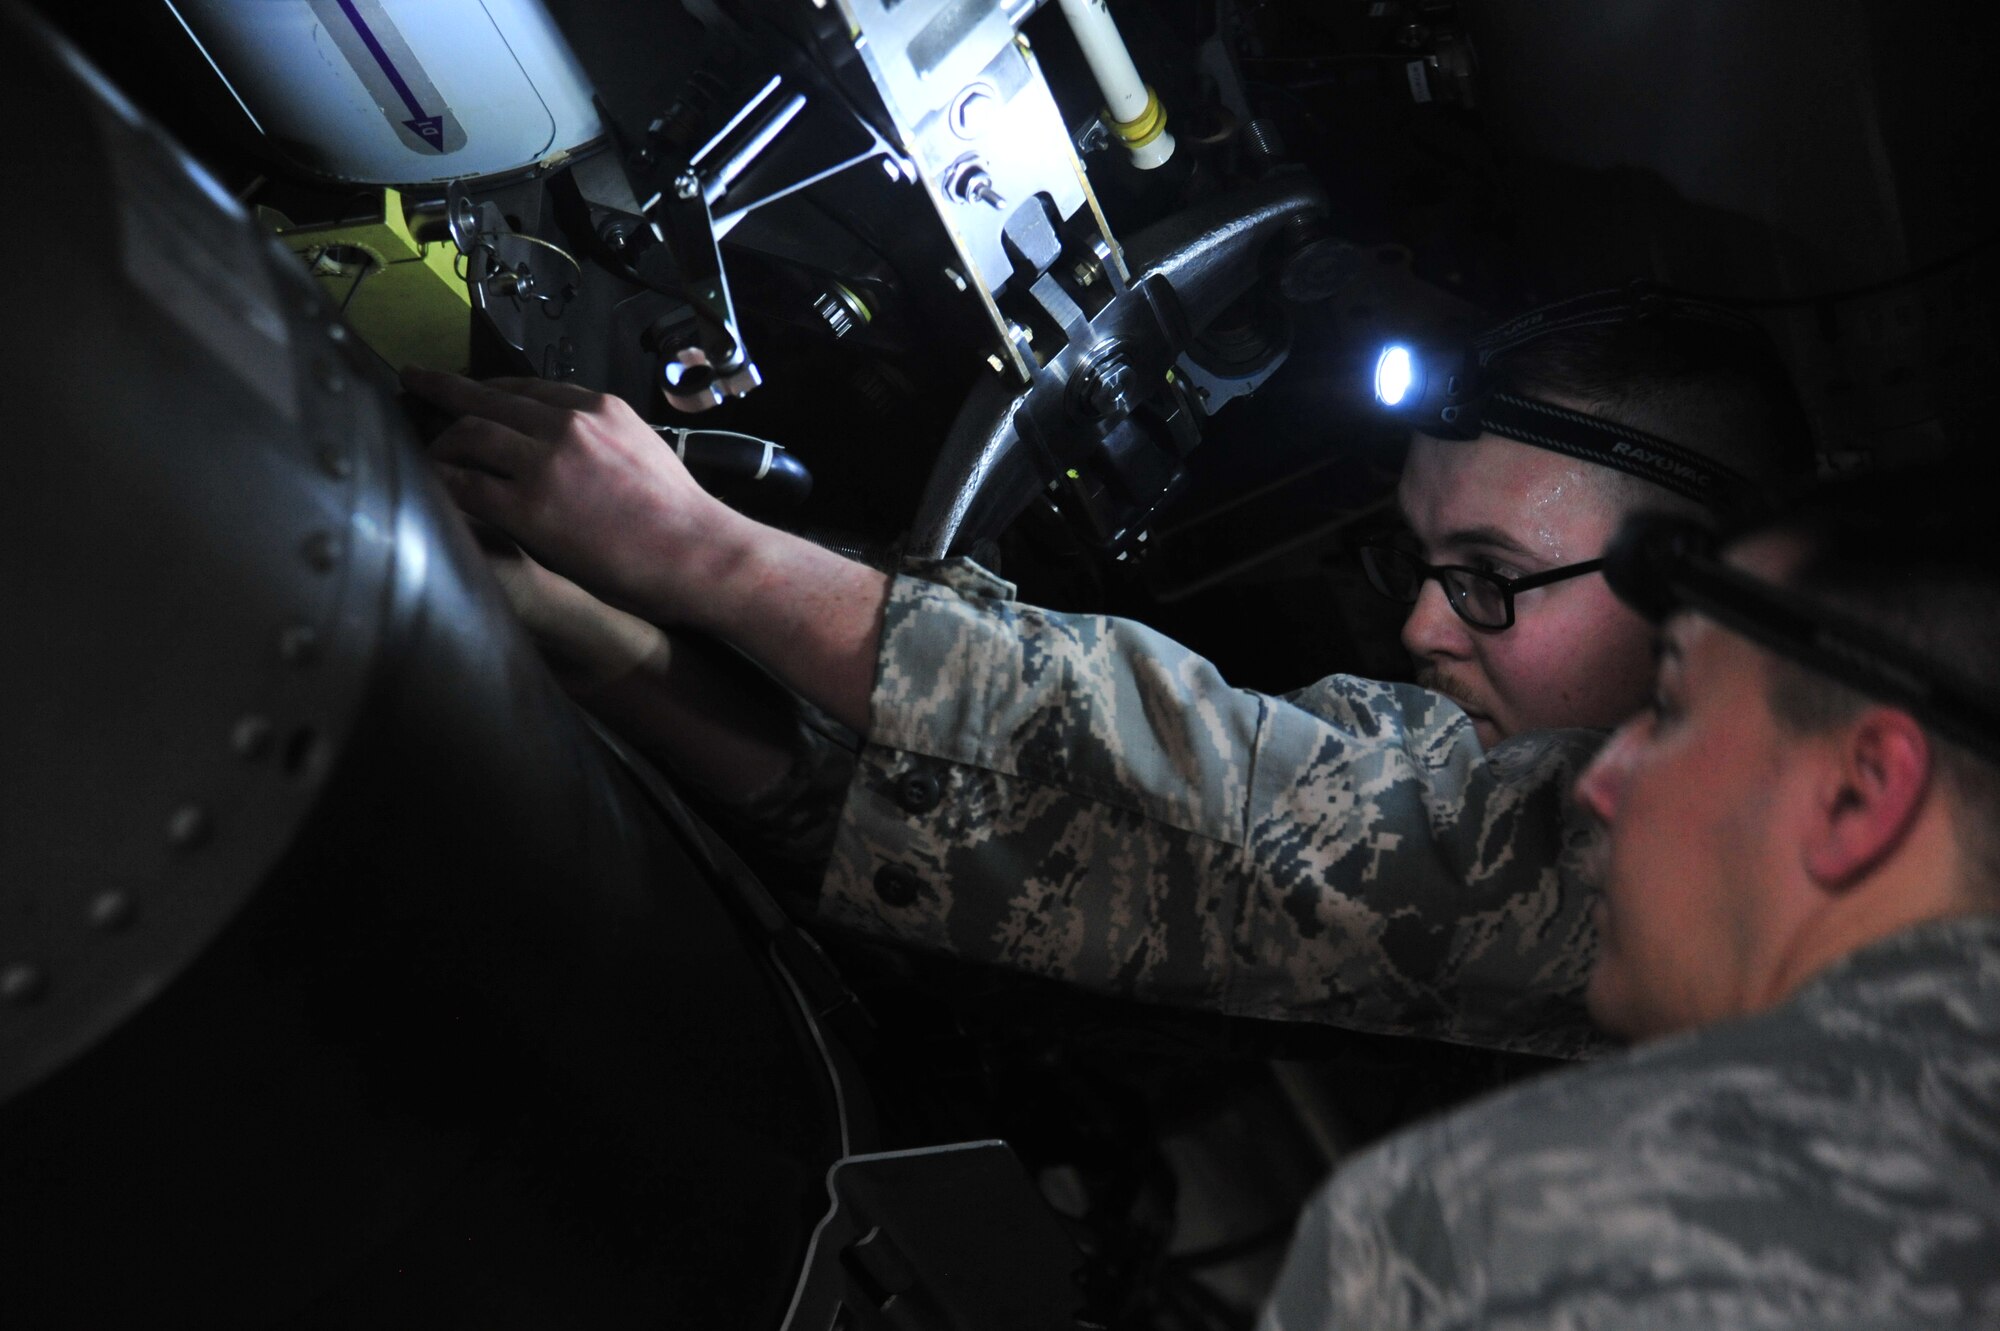 U.S. Air Force Tech. Sgt. Daniel Jensen, a load crew member assigned to the 131st Aircraft Maintenance Unit, secures the final trainer weapon for his team during the Annual Weapons Load Competition at Whiteman Air Force Base, Mo., Feb. 19, 2016. Each team must load two trainer weapons in addition to restocking all equipment before time is called.  